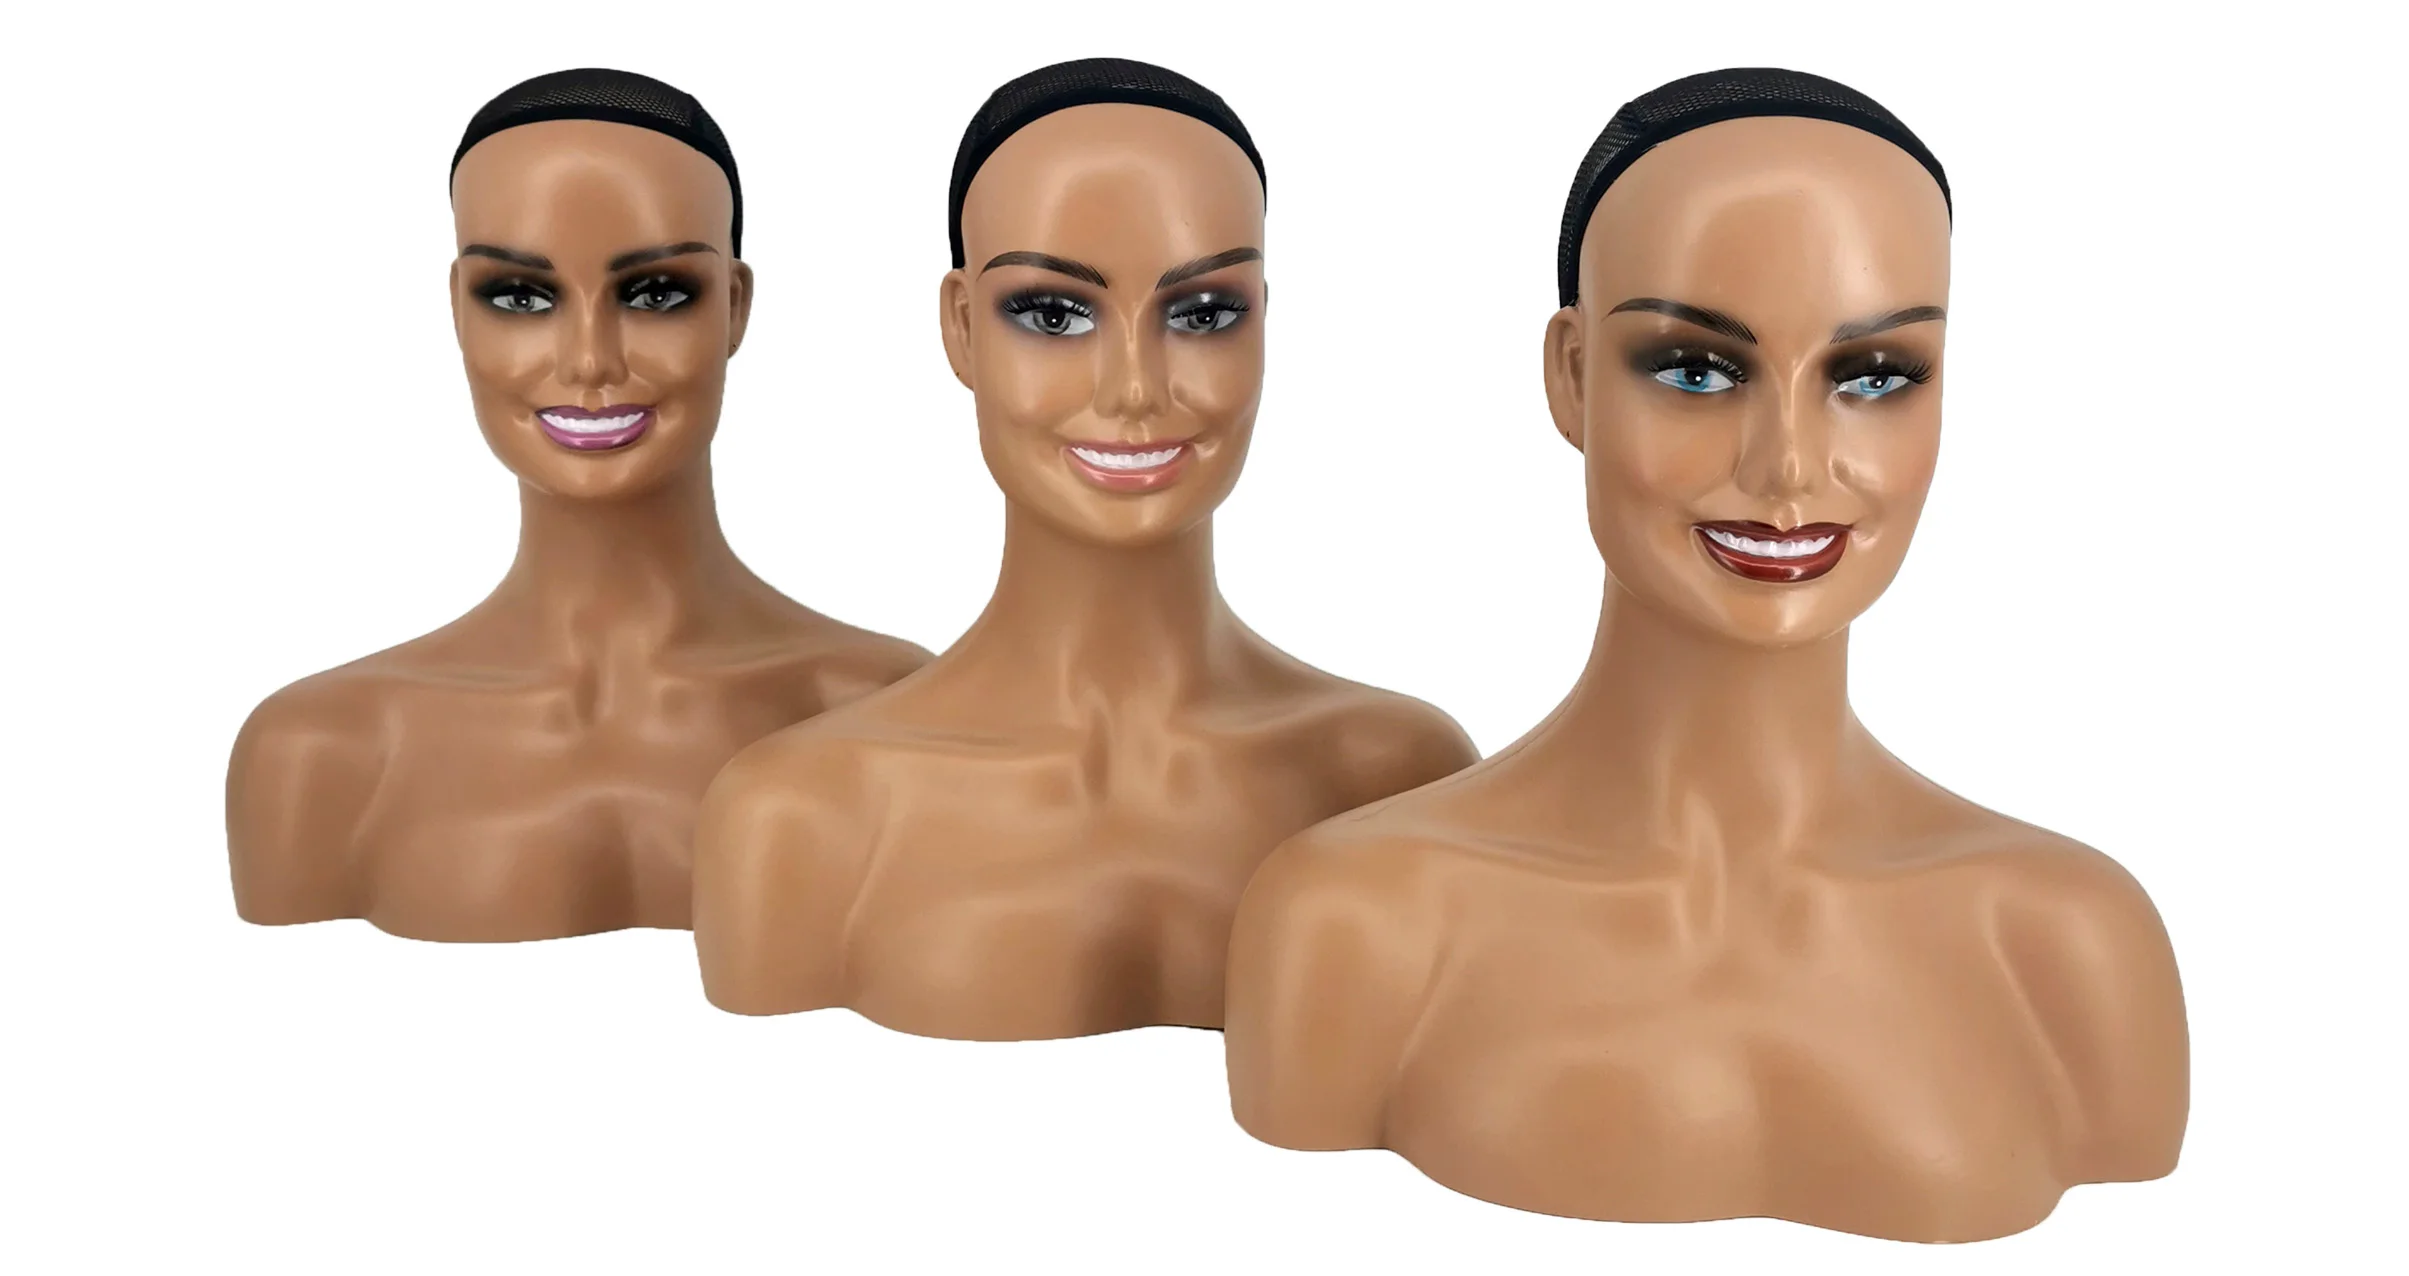 Smiling Mannequin Head With Shoulders Maniquin Head For Wigs Dark Brown Wig  Display Mannequin Head Female